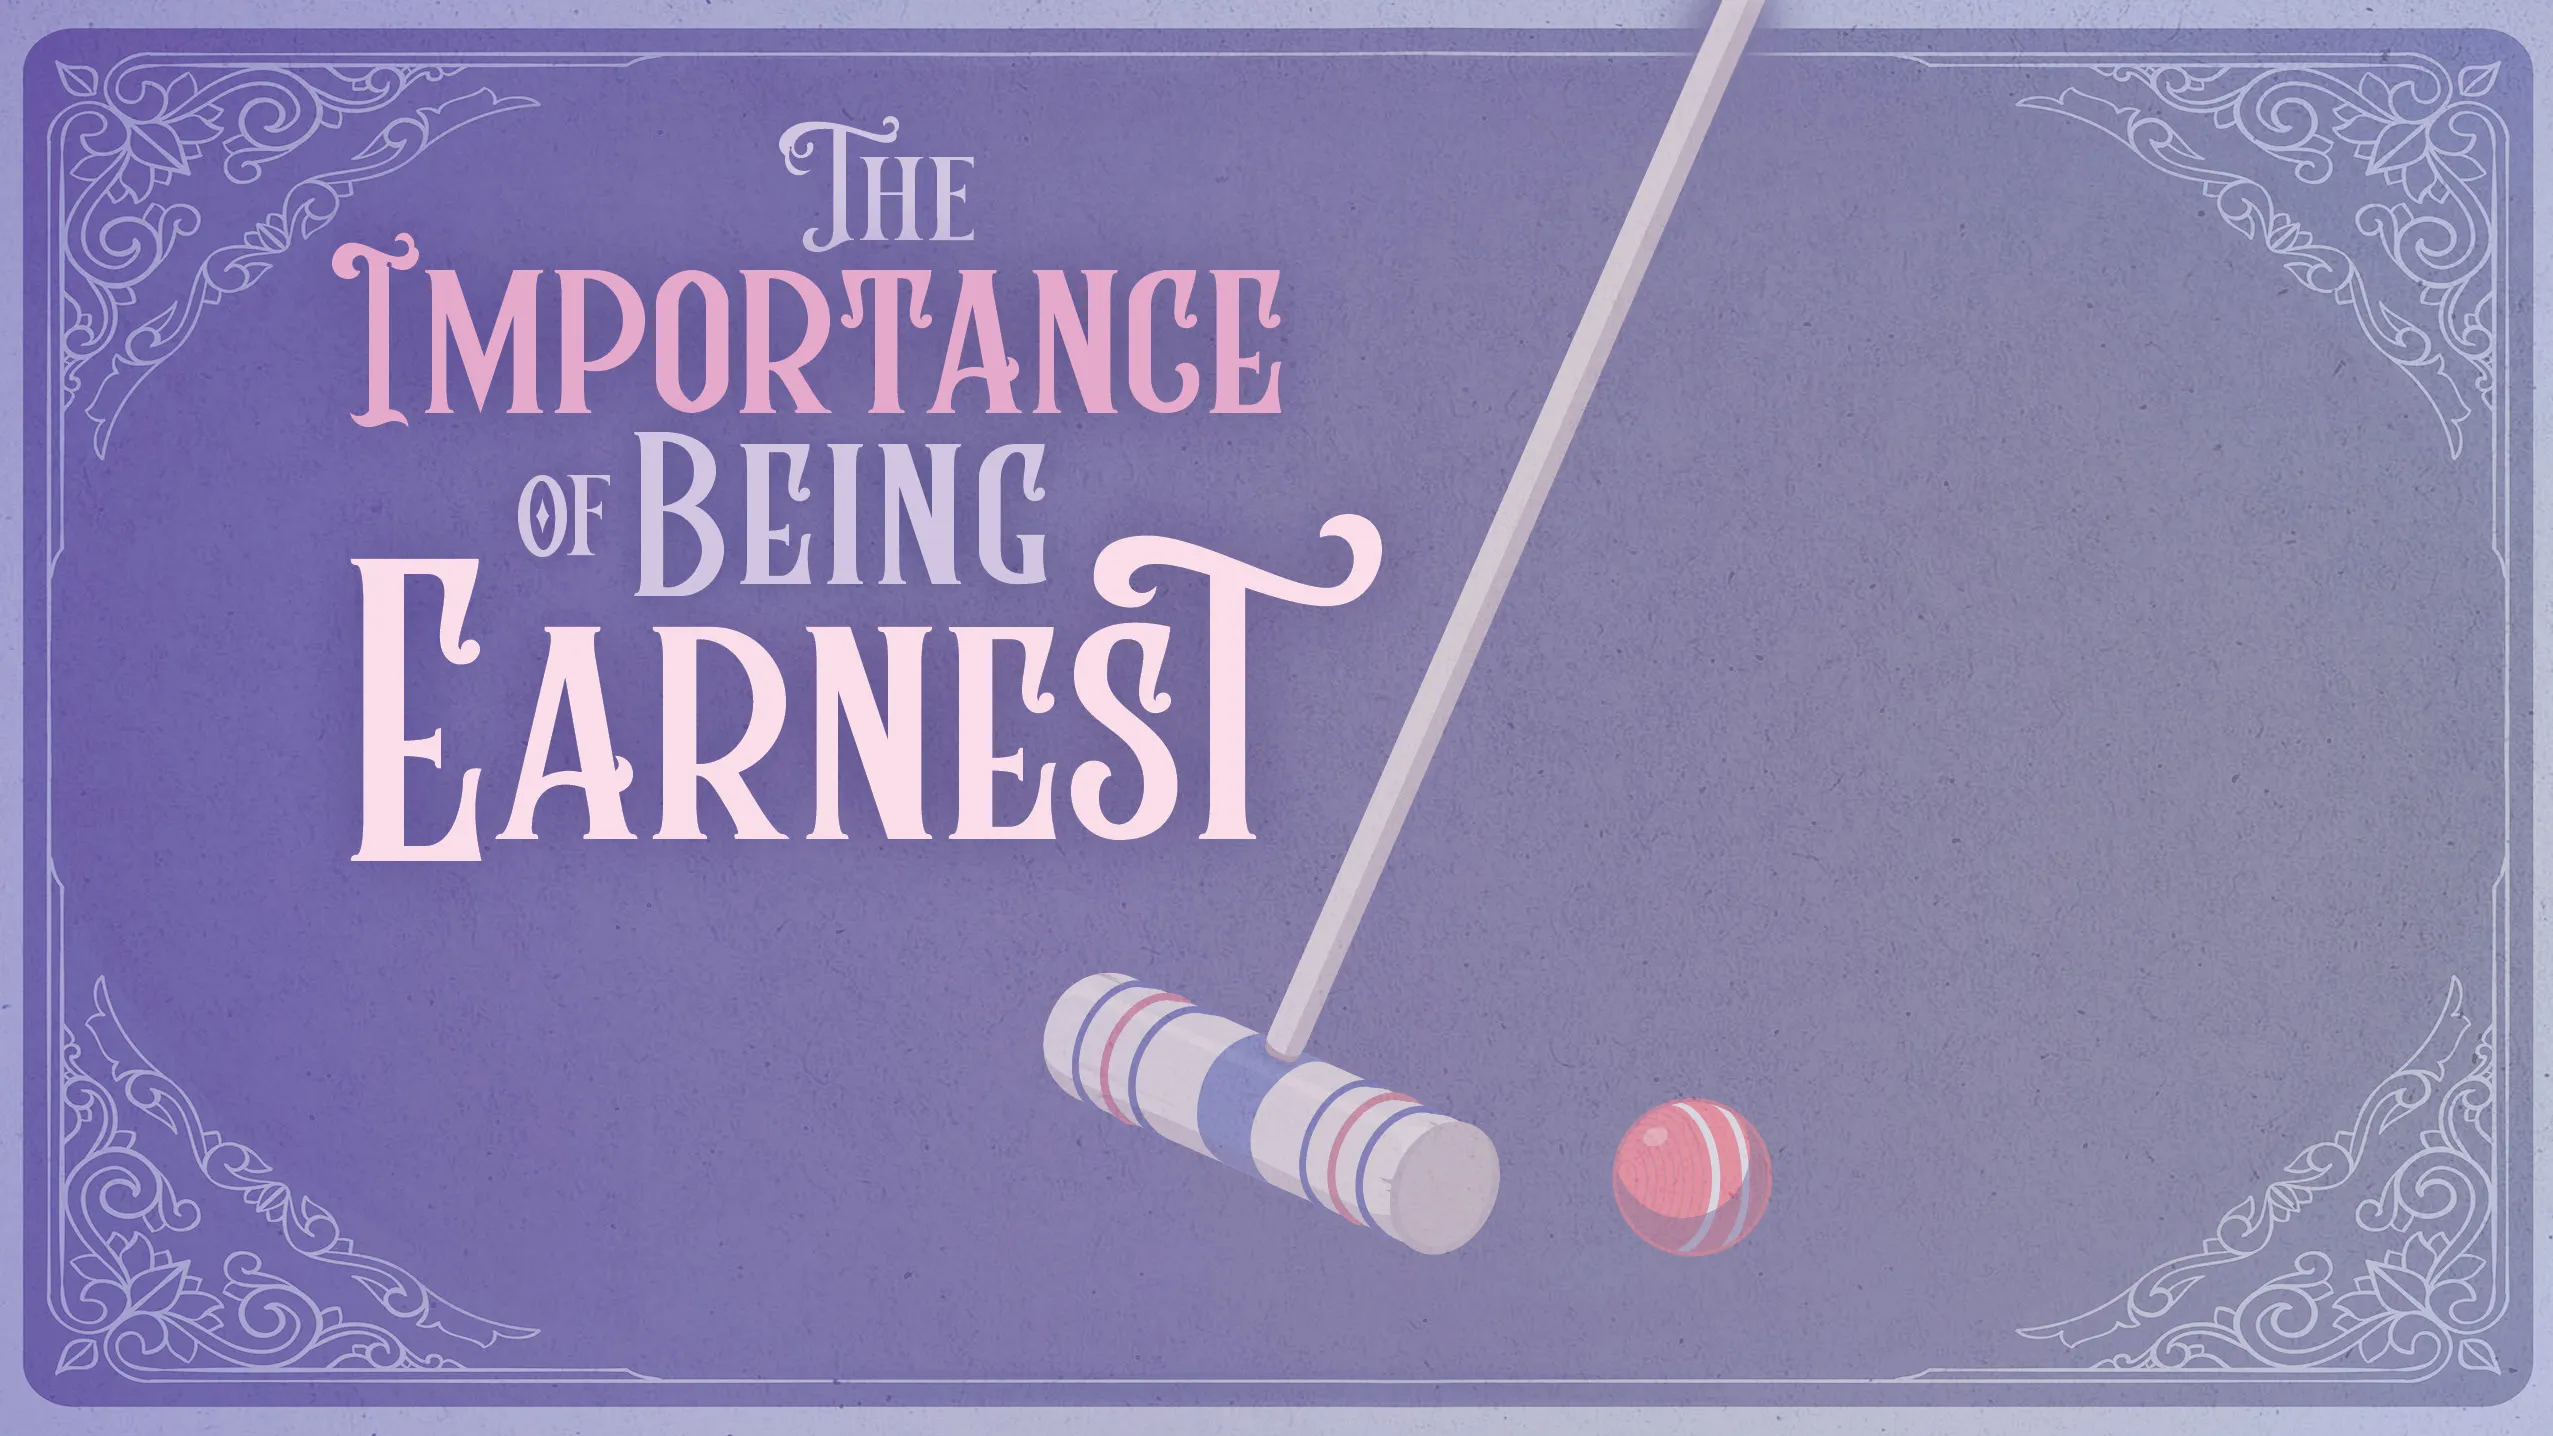 Theatre Department Brings “The Importance of Being Earnest” to Belhaven